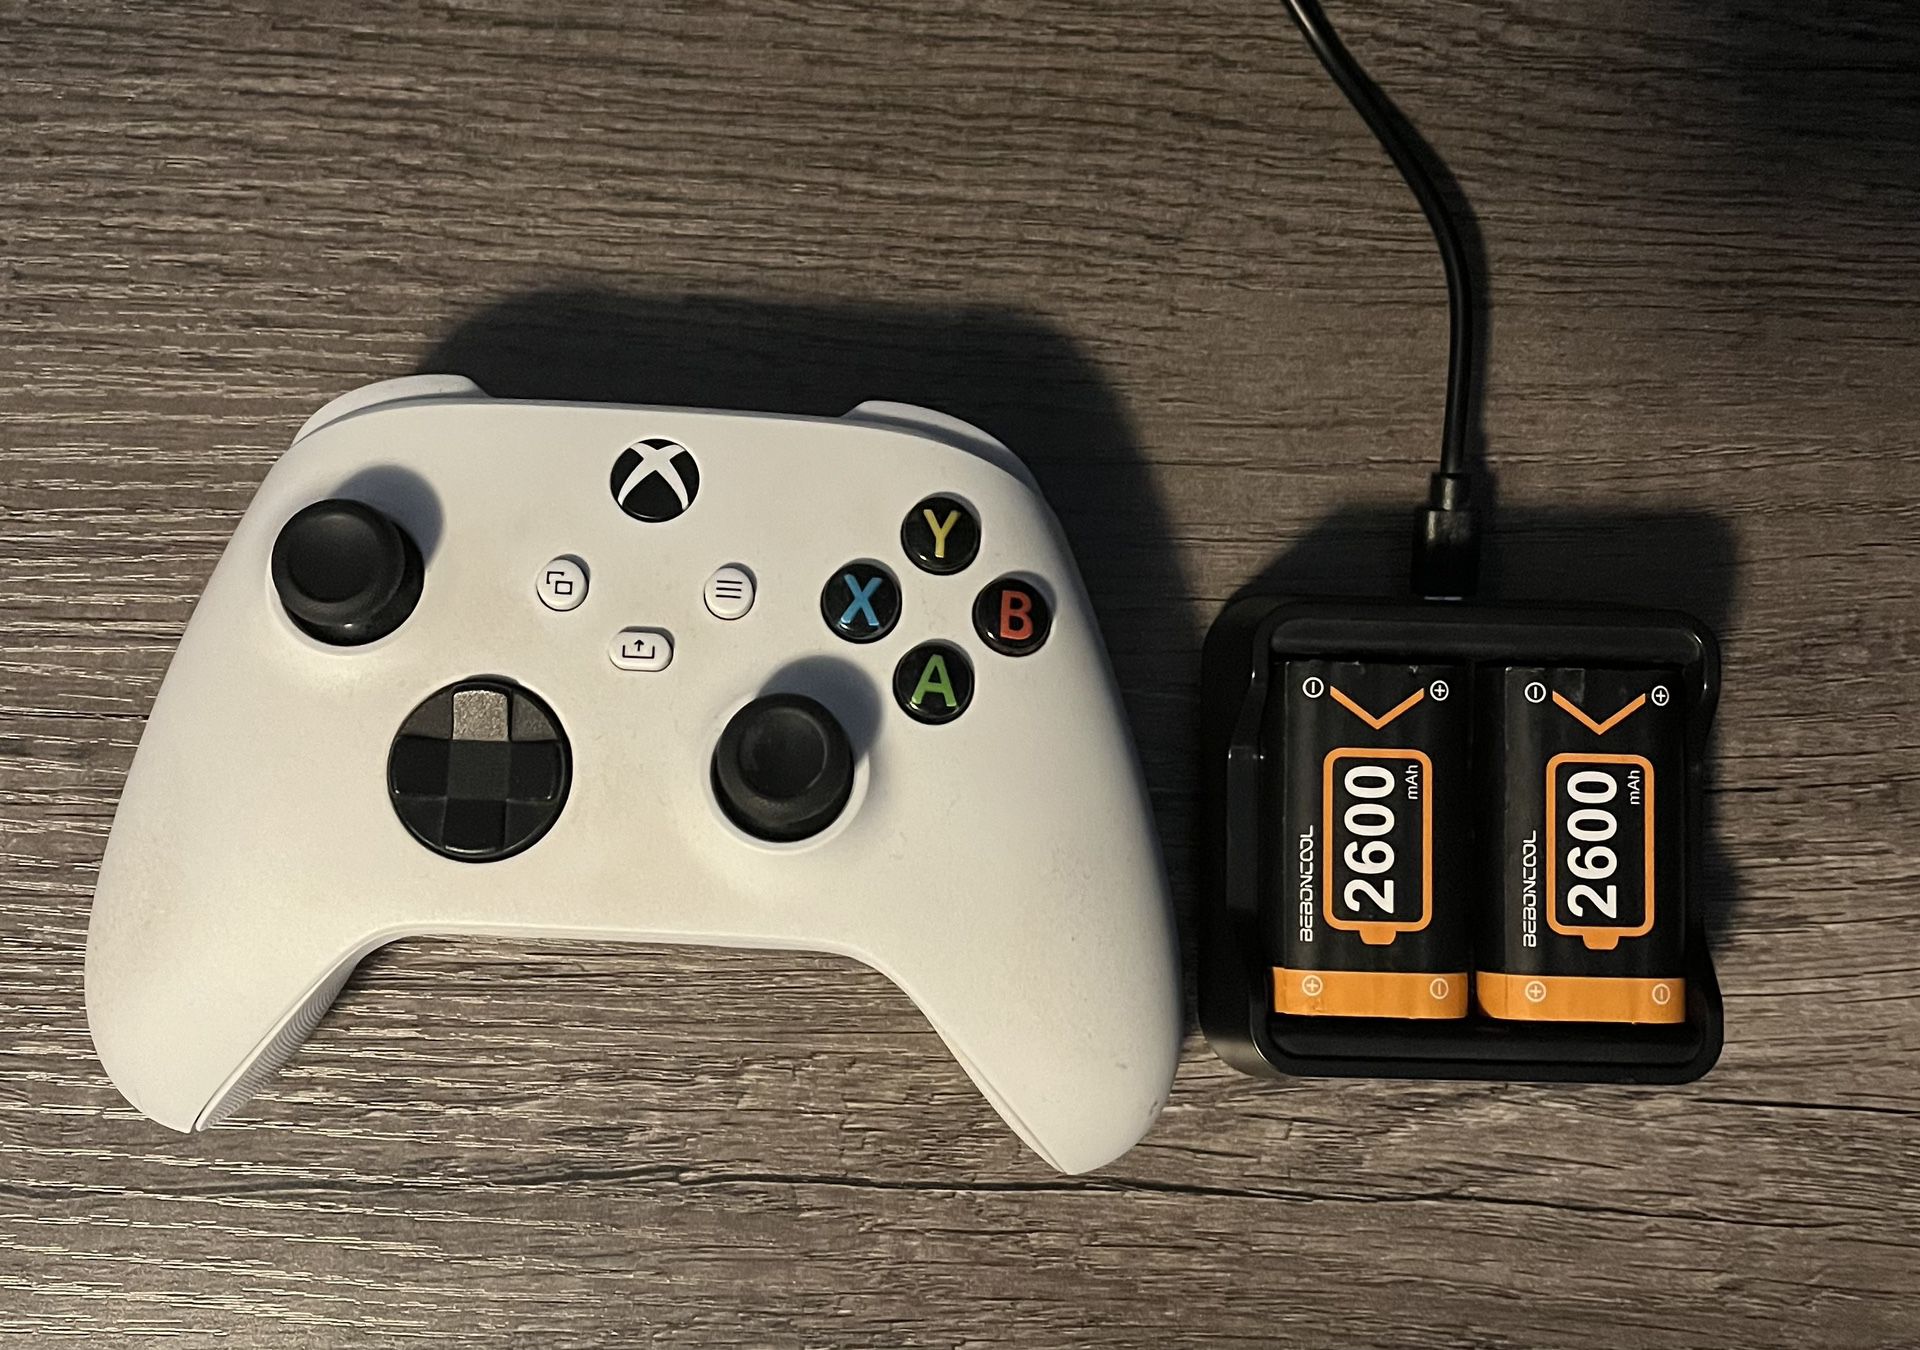 Xbox Series S Controller With Rechargeable Batteries(2pack)